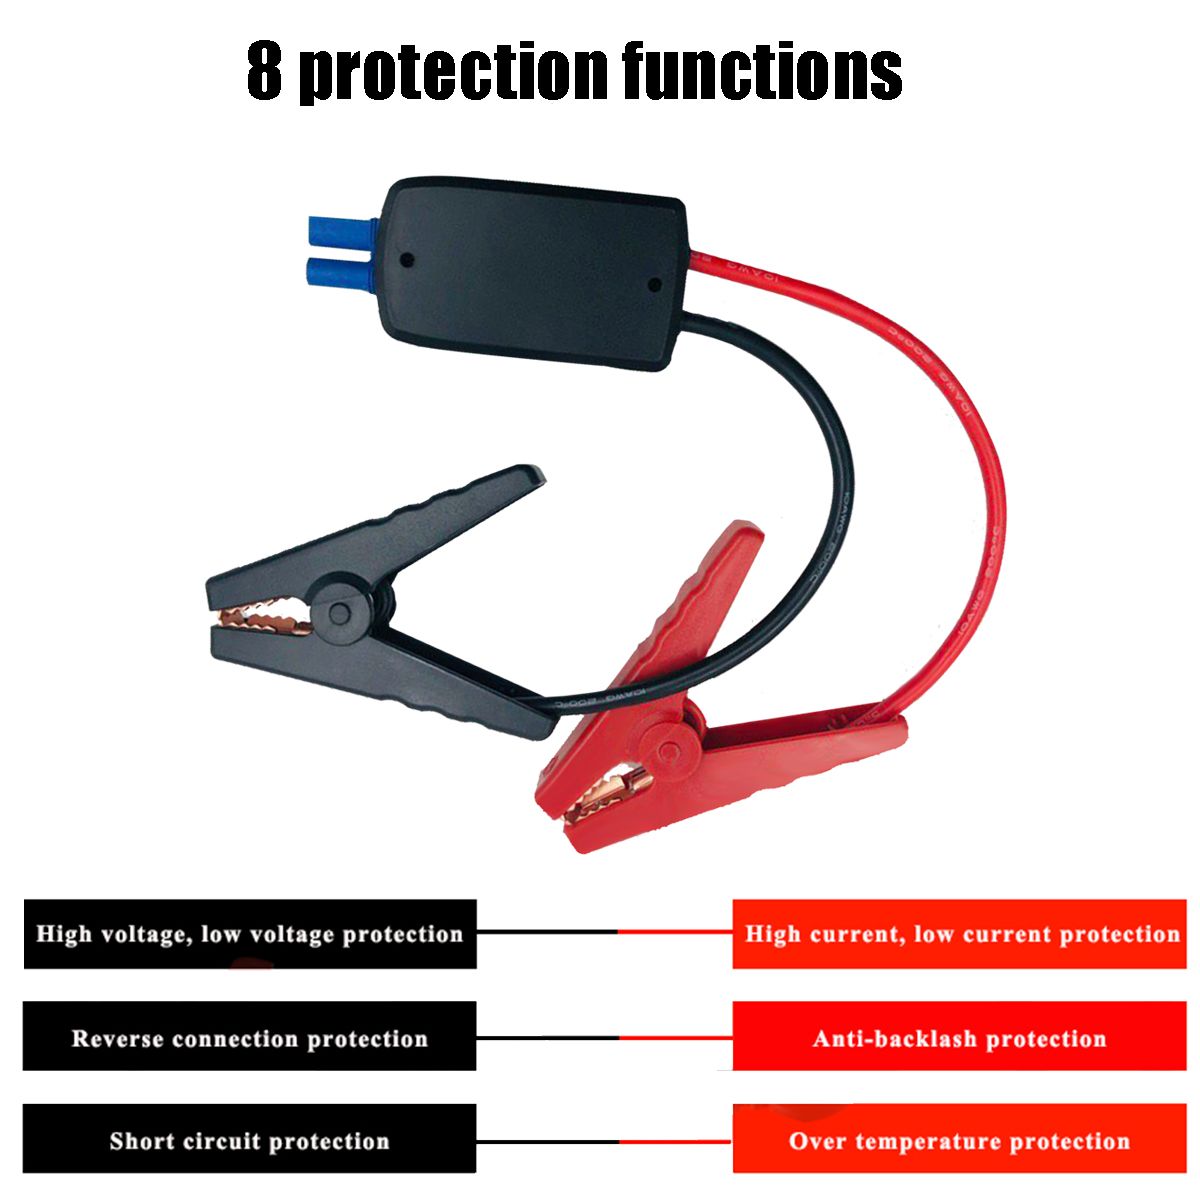 Intelligent-Fastener-Clip-Clamp-Relay-Protection-500A-for-Car-Jump-Starter-Power-Supply-1593790